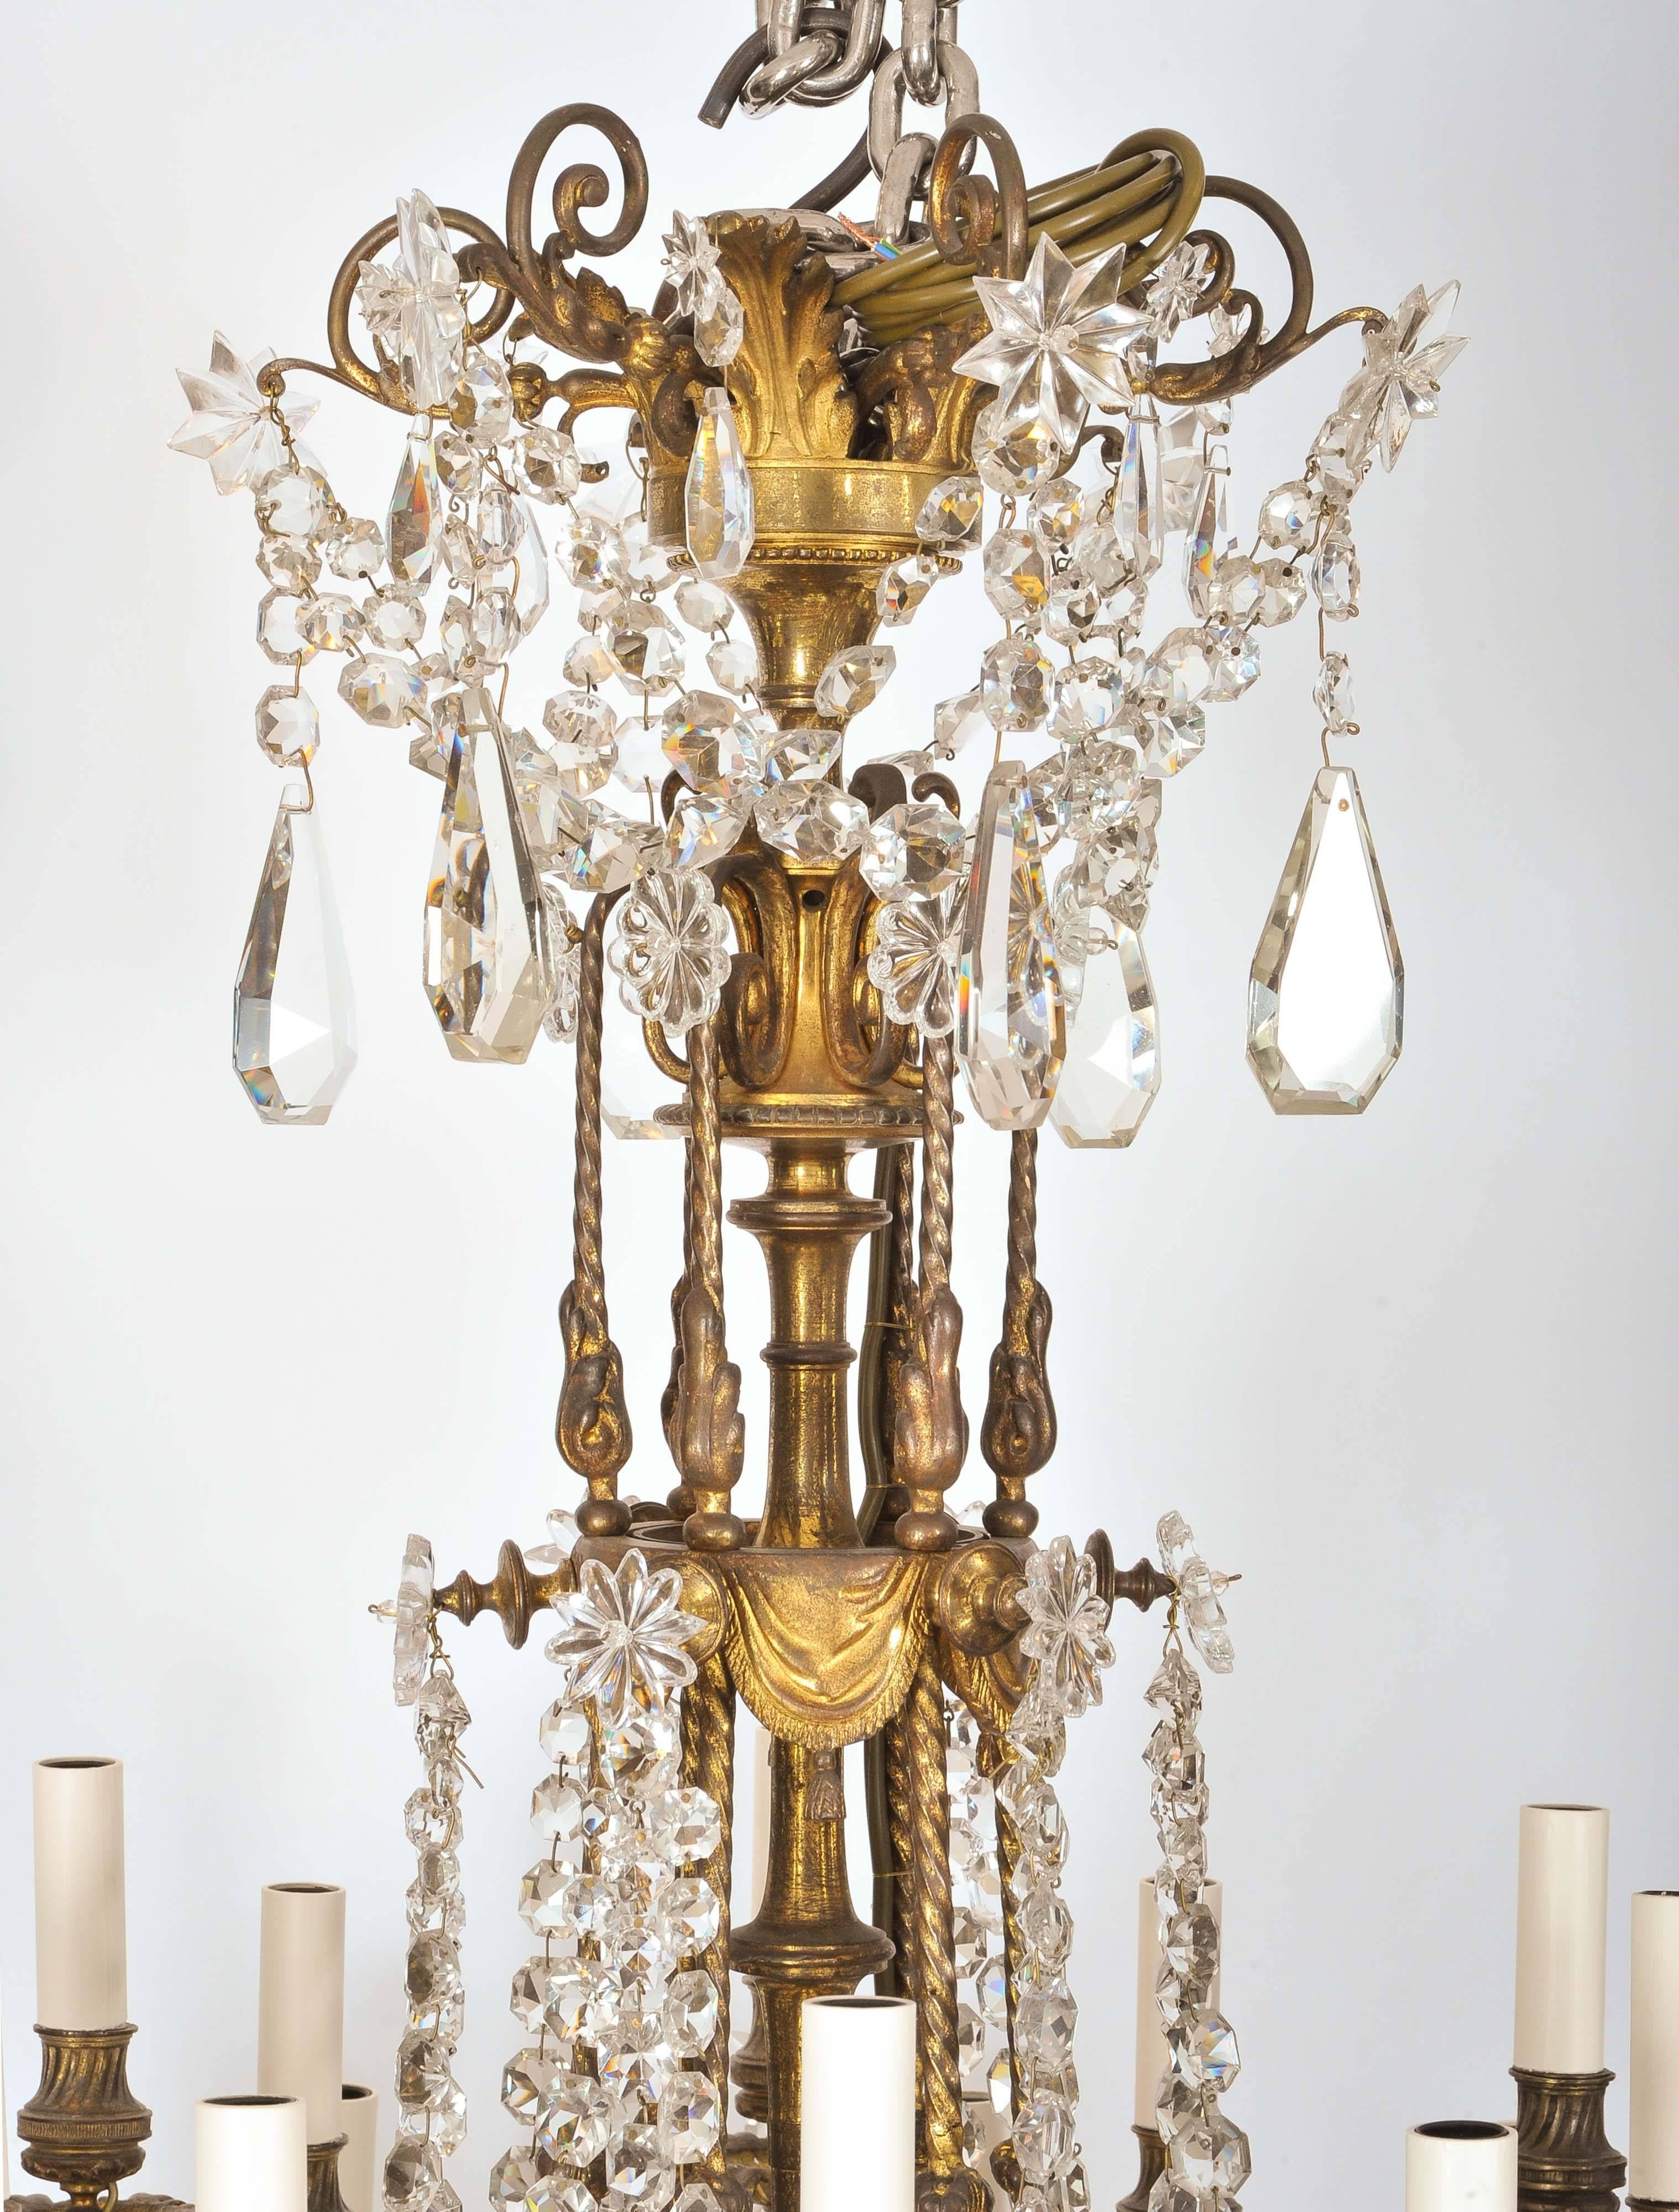 This superb and gorgeous mid-19th century Chandelier is designed from ormolu and crystal with two tiers. Each tier has six branches, the top tier with a singular branch and light, while the lower tier has a singular branch that divides to three